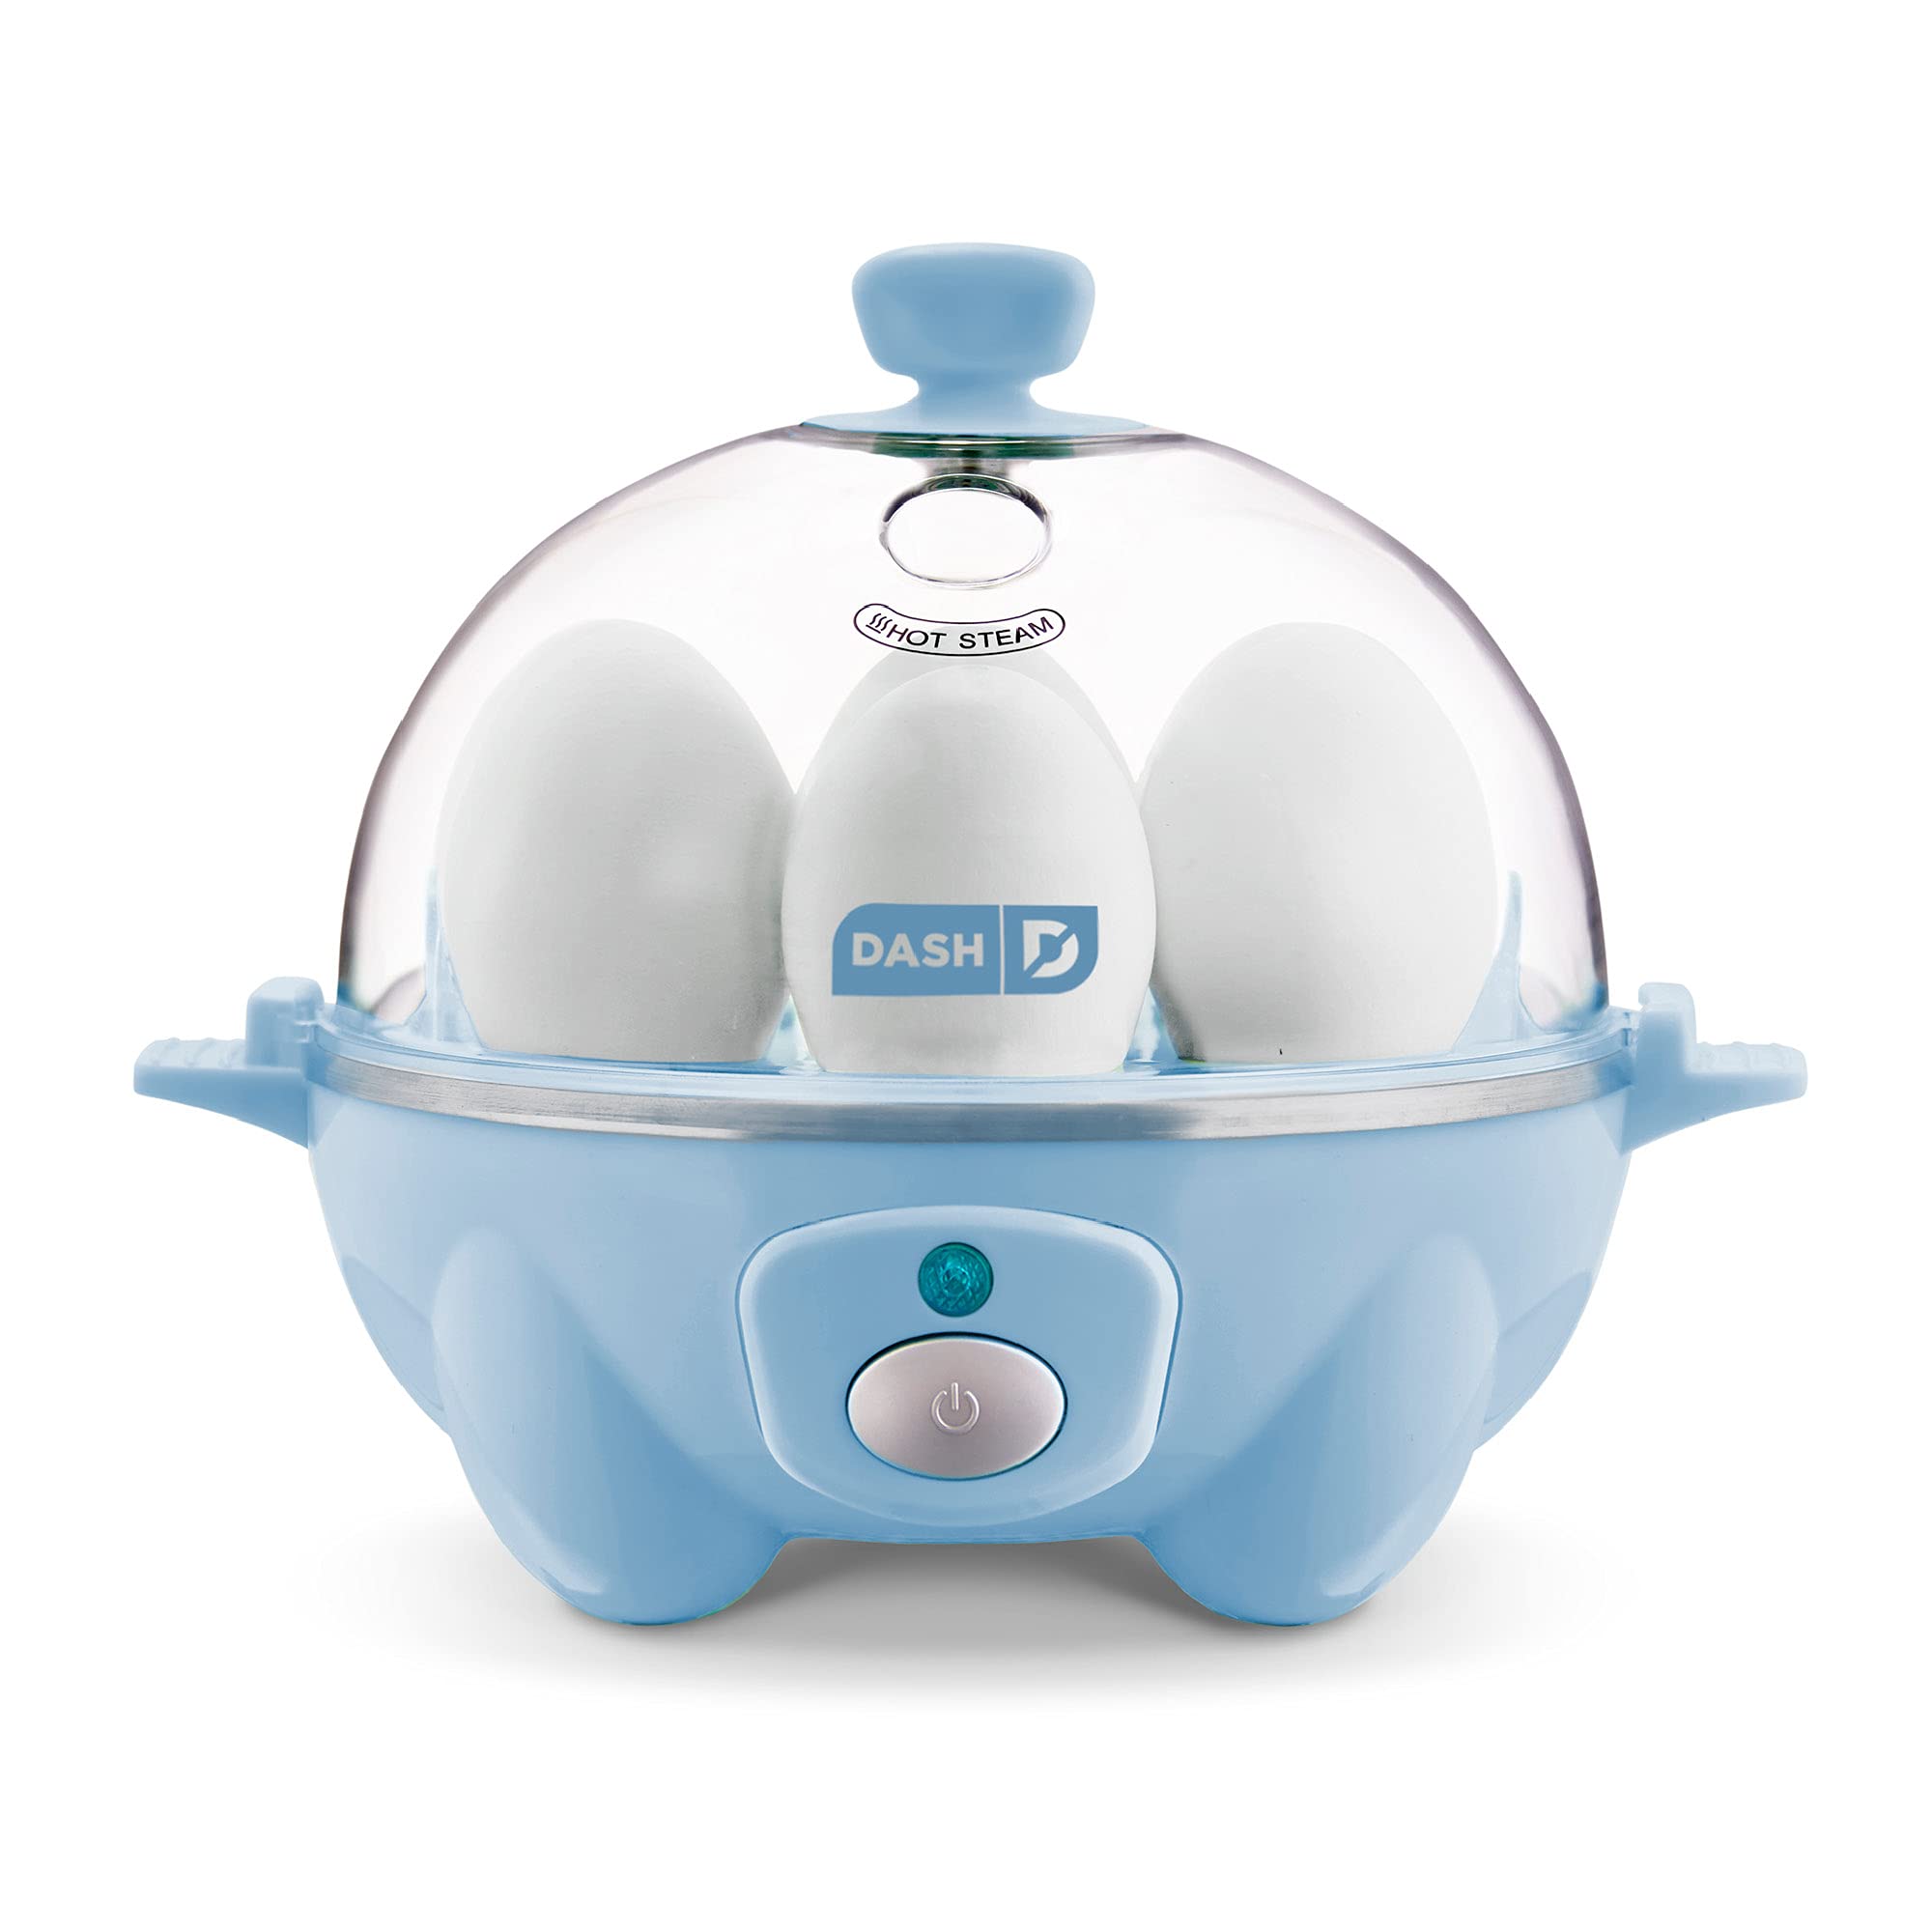 $14.99 Dash Rapid Egg Cooker: 6 Egg Capacity Electric Egg Cooker For Hard Boiled Eggs, Poached Eggs, Scrambled Eggs, Or Omelets With Auto Shut Off Feature - Dream Blue At Amazon,